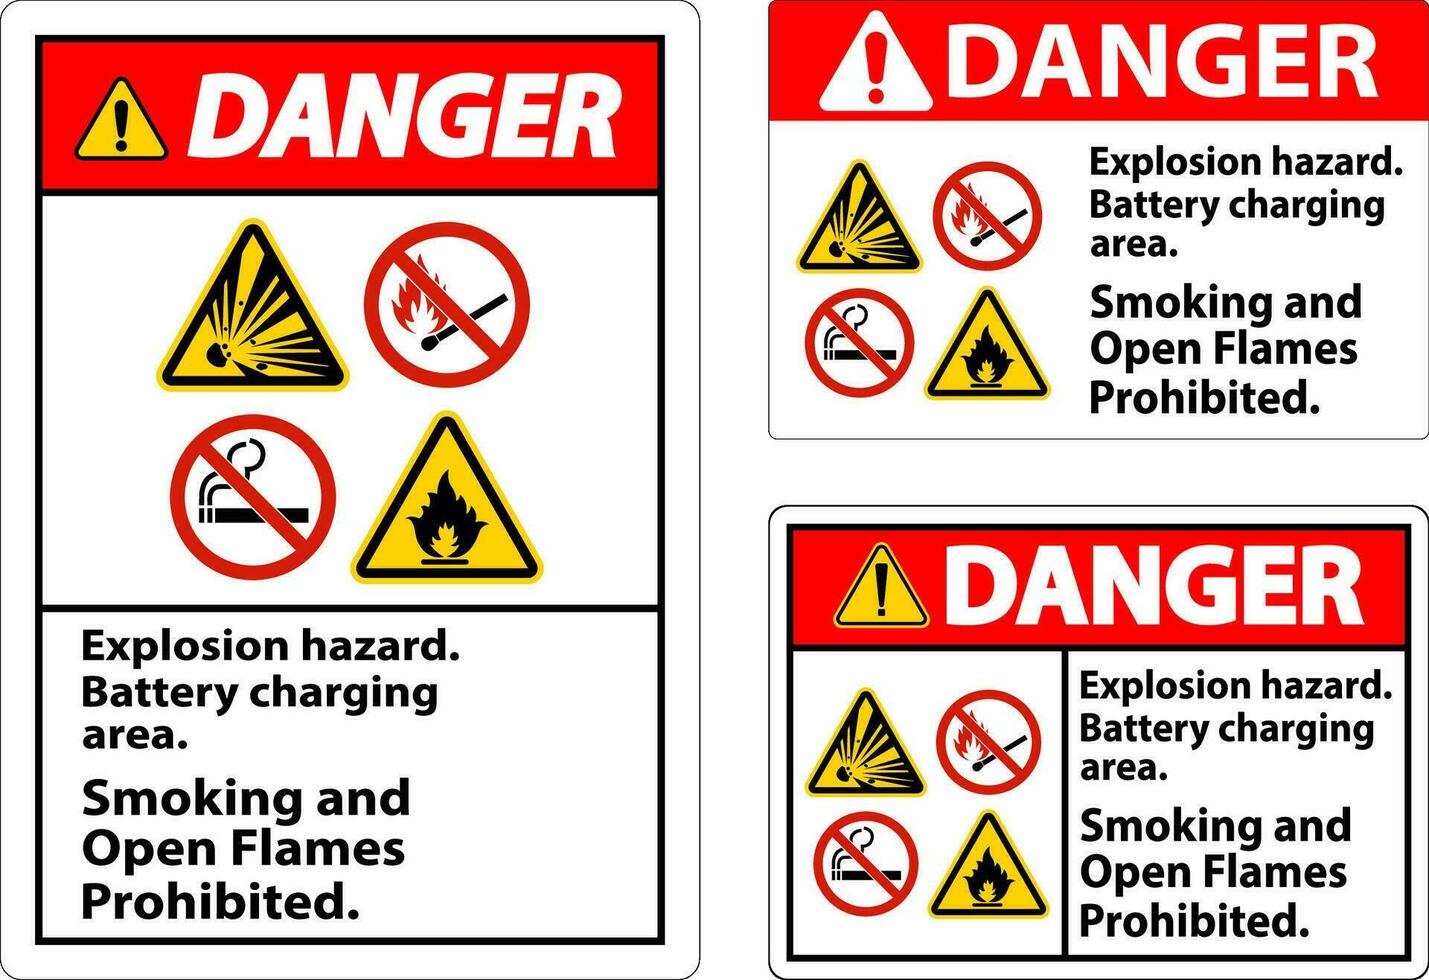 Danger Sign Explosion Hazard, Battery Charging Area, Smoking And Open Flames Prohibited vector